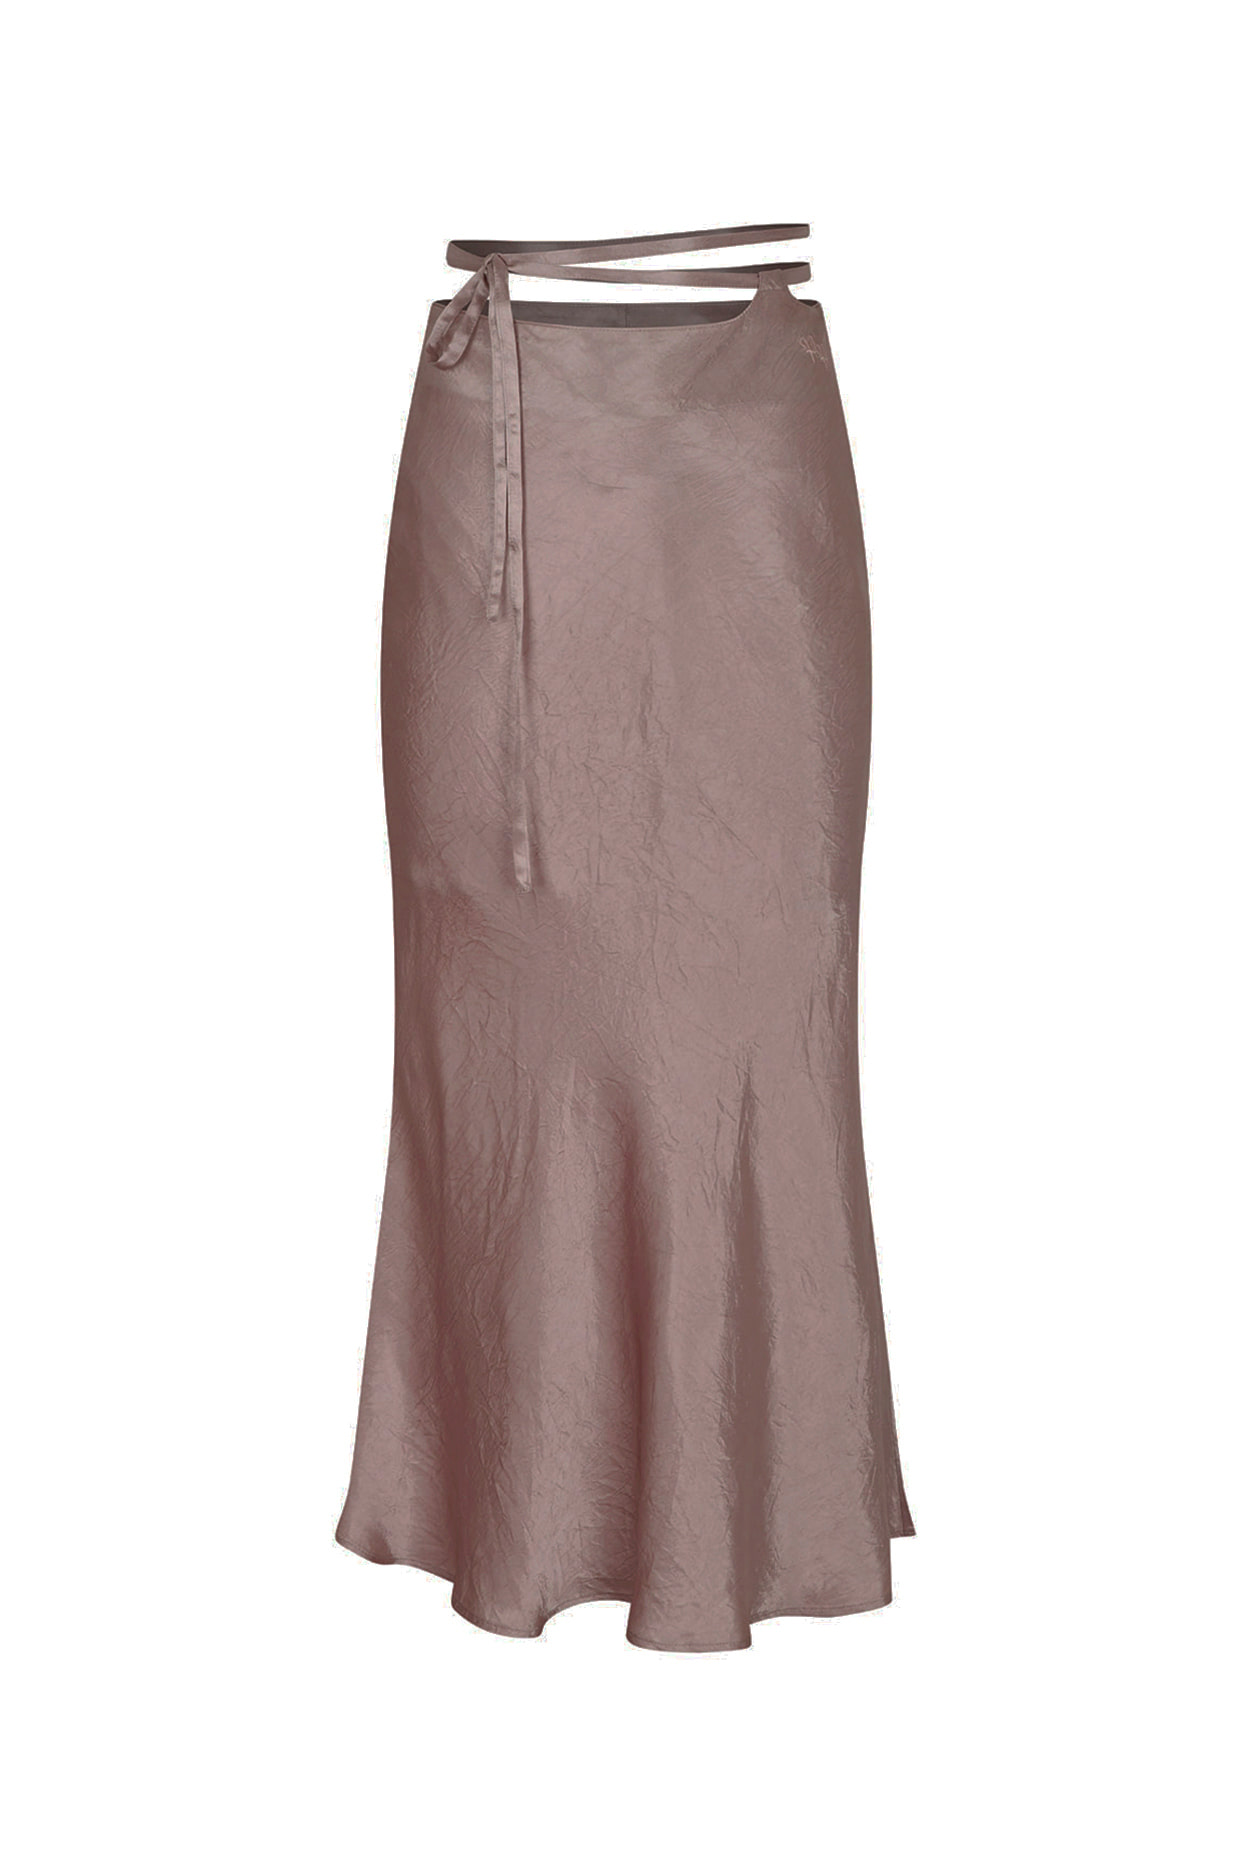 ORCHID SKIRT brown